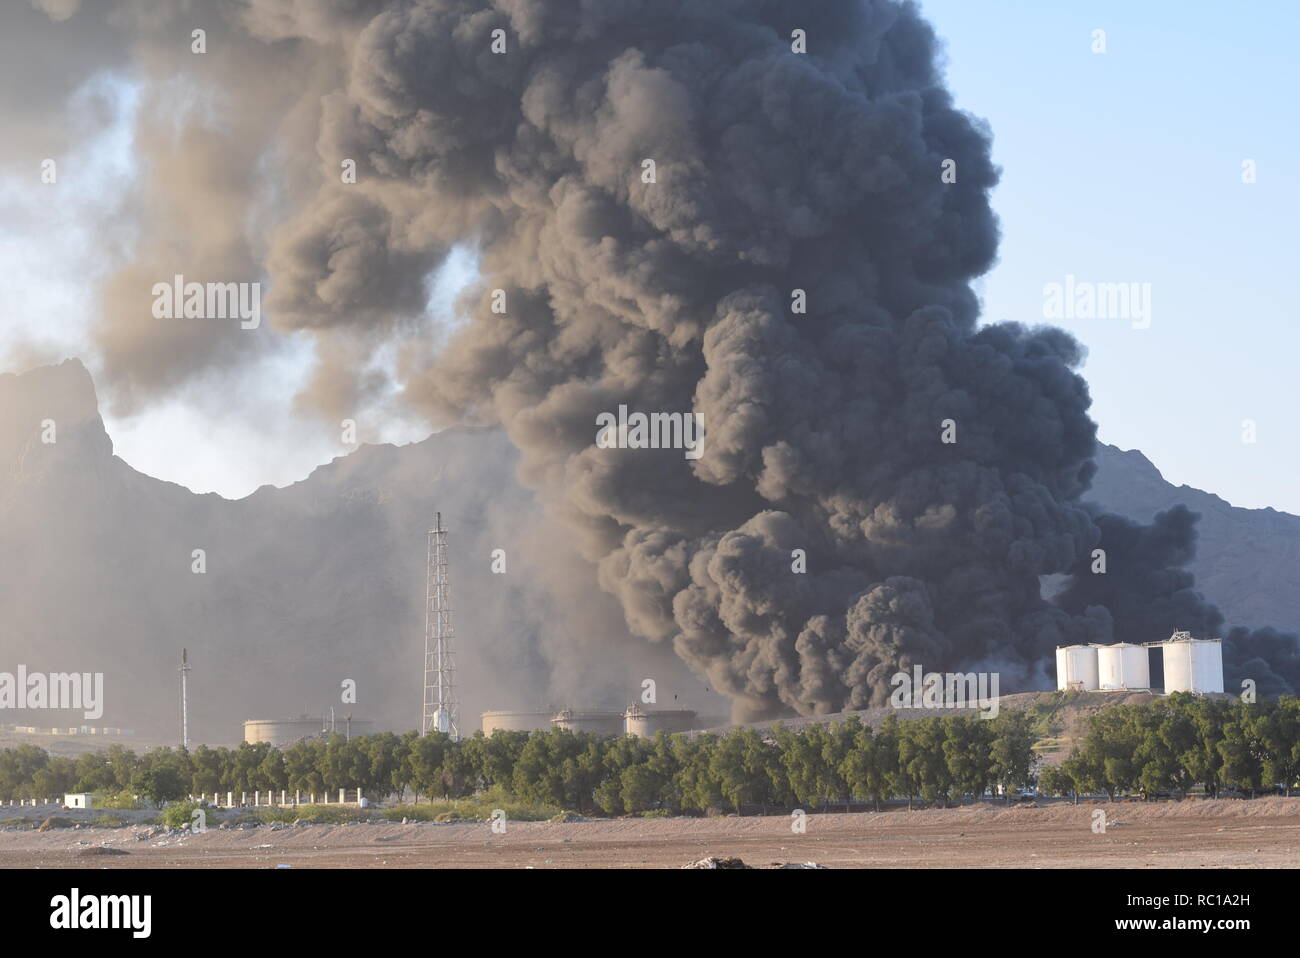 Aden, Yemen. 12th Jan, 2019. Photo taken on Jan. 12, 2019 shows heavy smoke from a state-owned oil refinery in Aden, Yemen. A new powerful explosion hit the the state-owned oil refinery in Aden on Saturday evening, injuring at least 15 people, a security official told Xinhua. Credit: Murad Abdo/Xinhua/Alamy Live News Credit: Xinhua/Alamy Live News Stock Photo